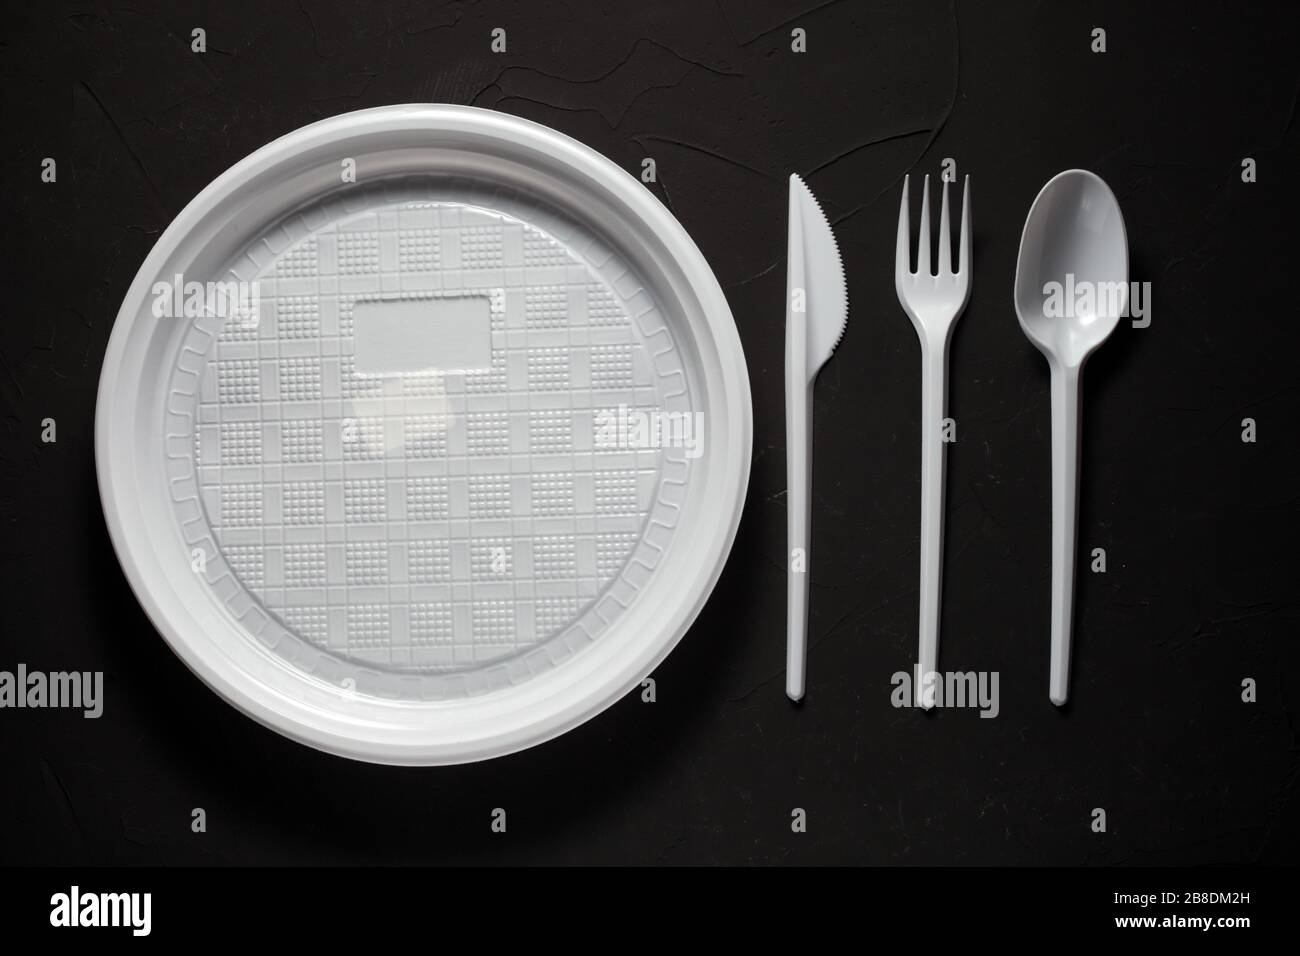 disposable plate with disposable fork, spoon, knife on a dark background Stock Photo